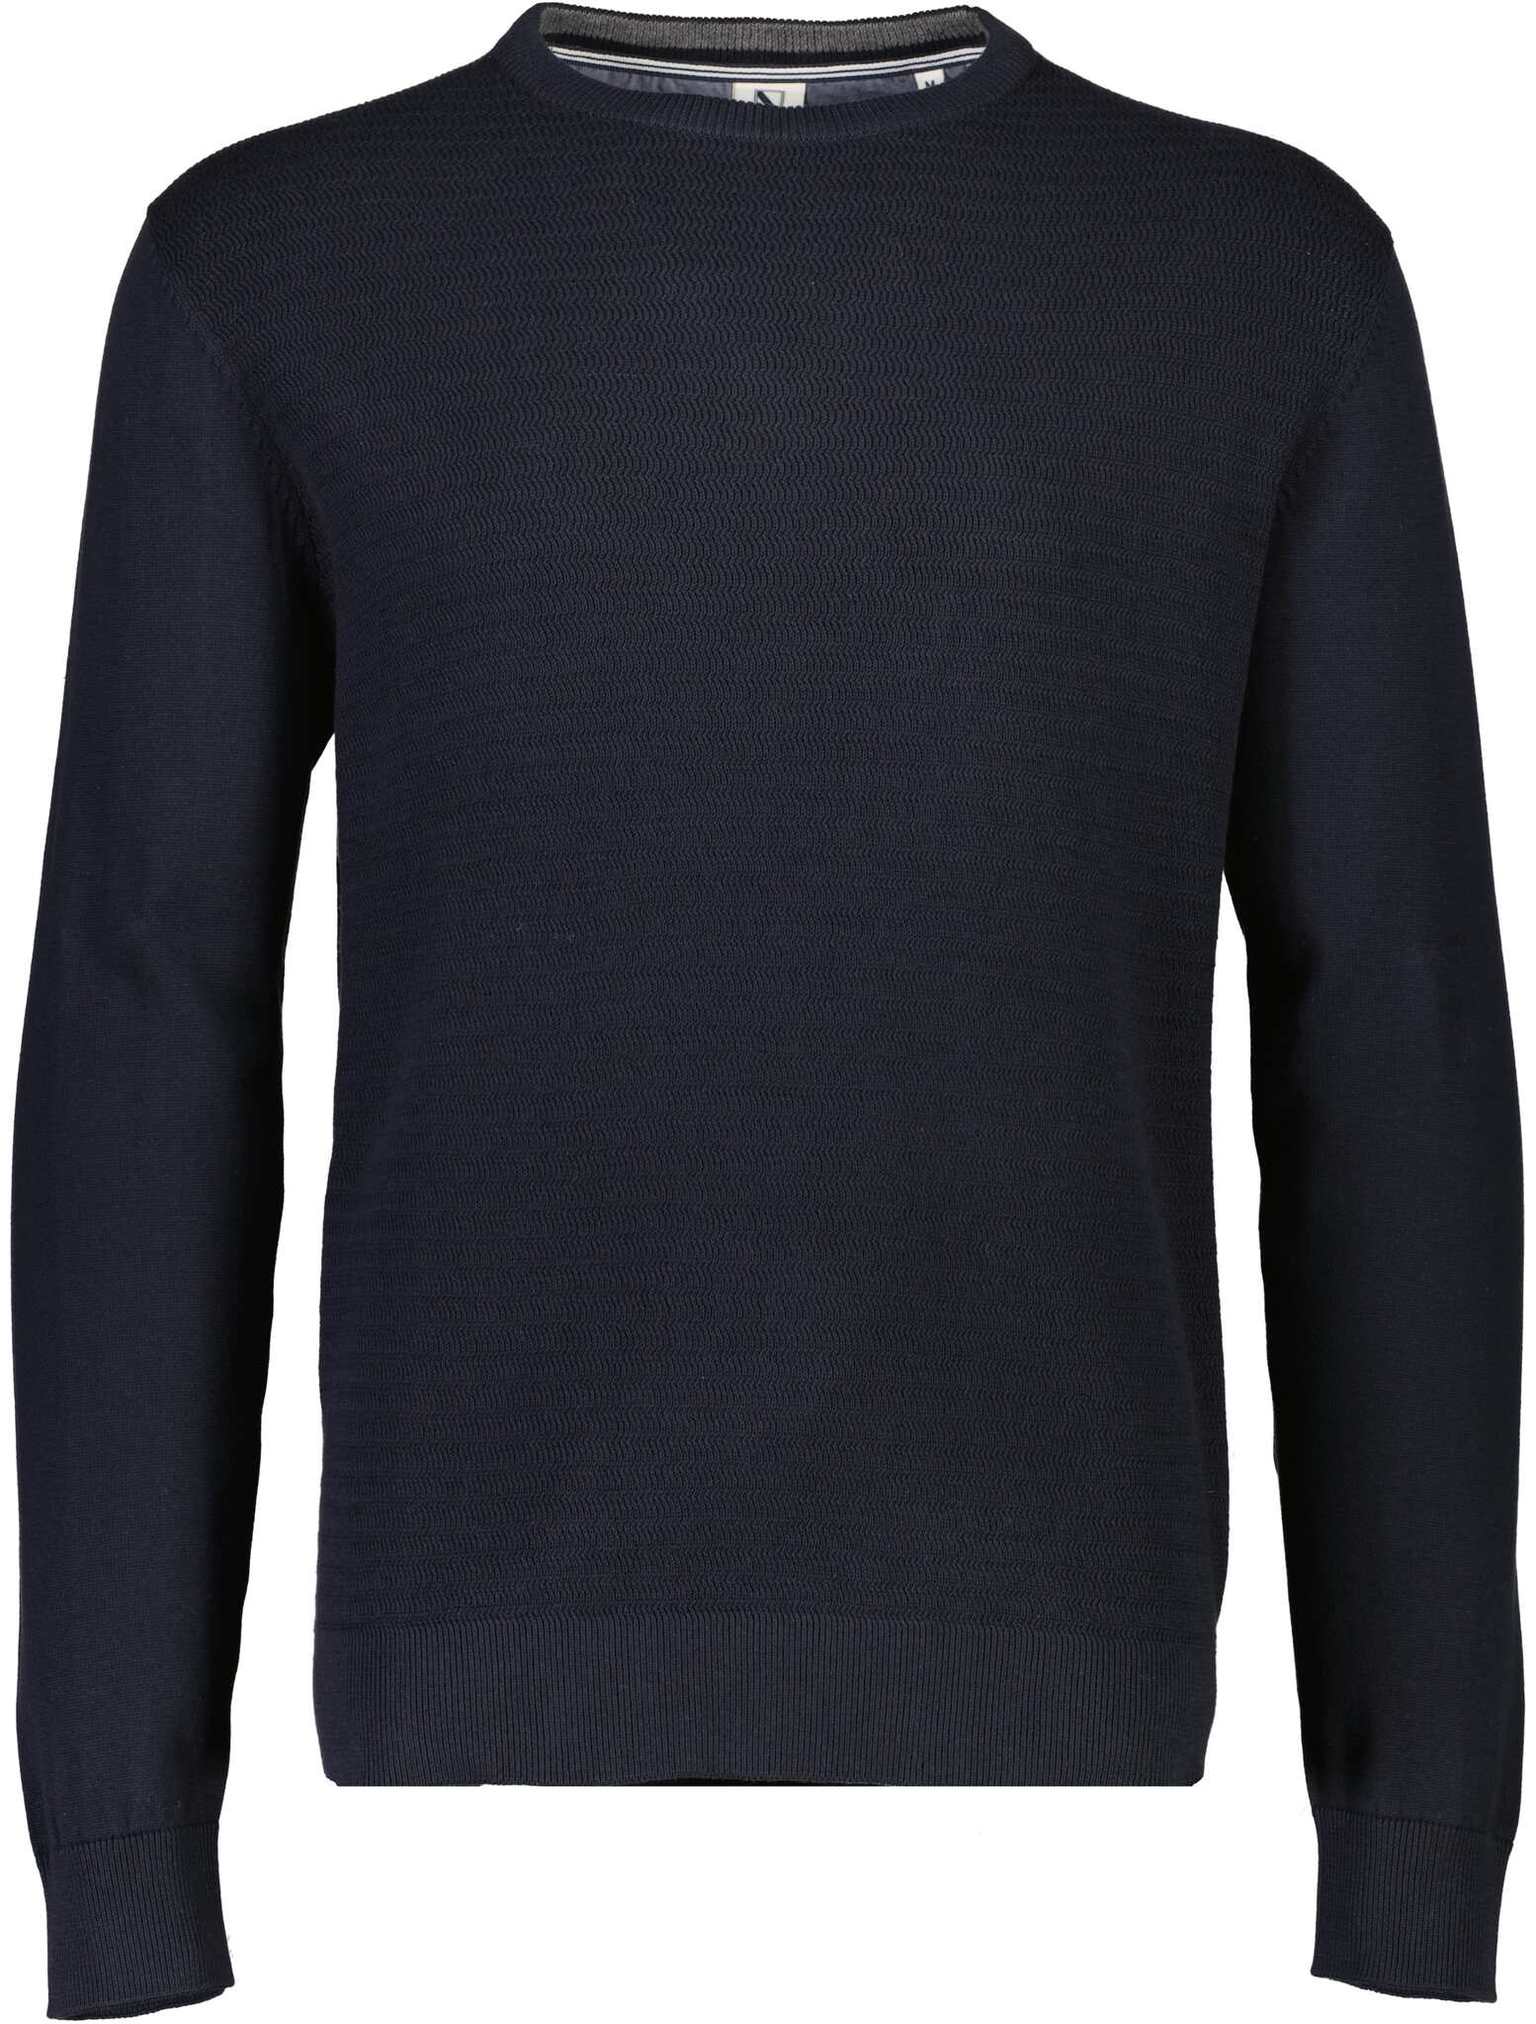 Structure o-neck knit